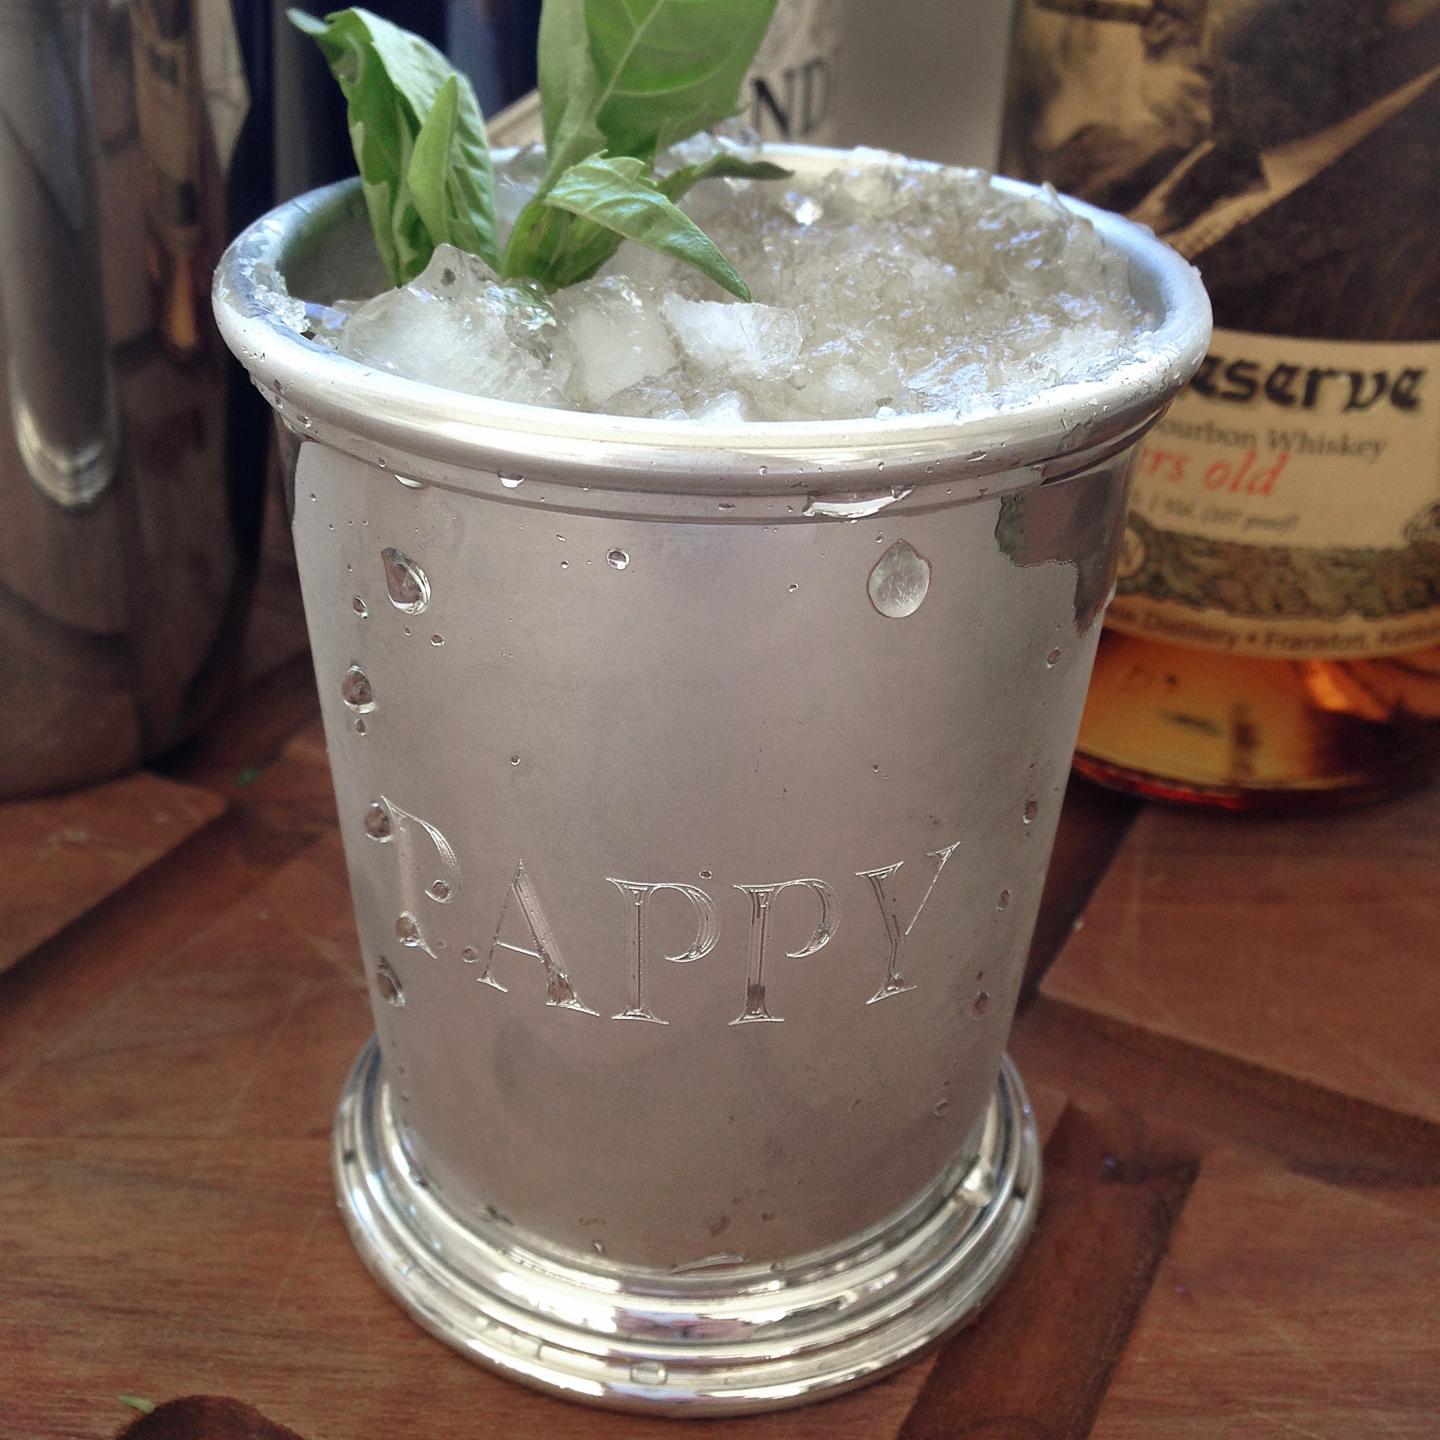 It's Mint Julep Month: With Less Than A Month Until Derby!